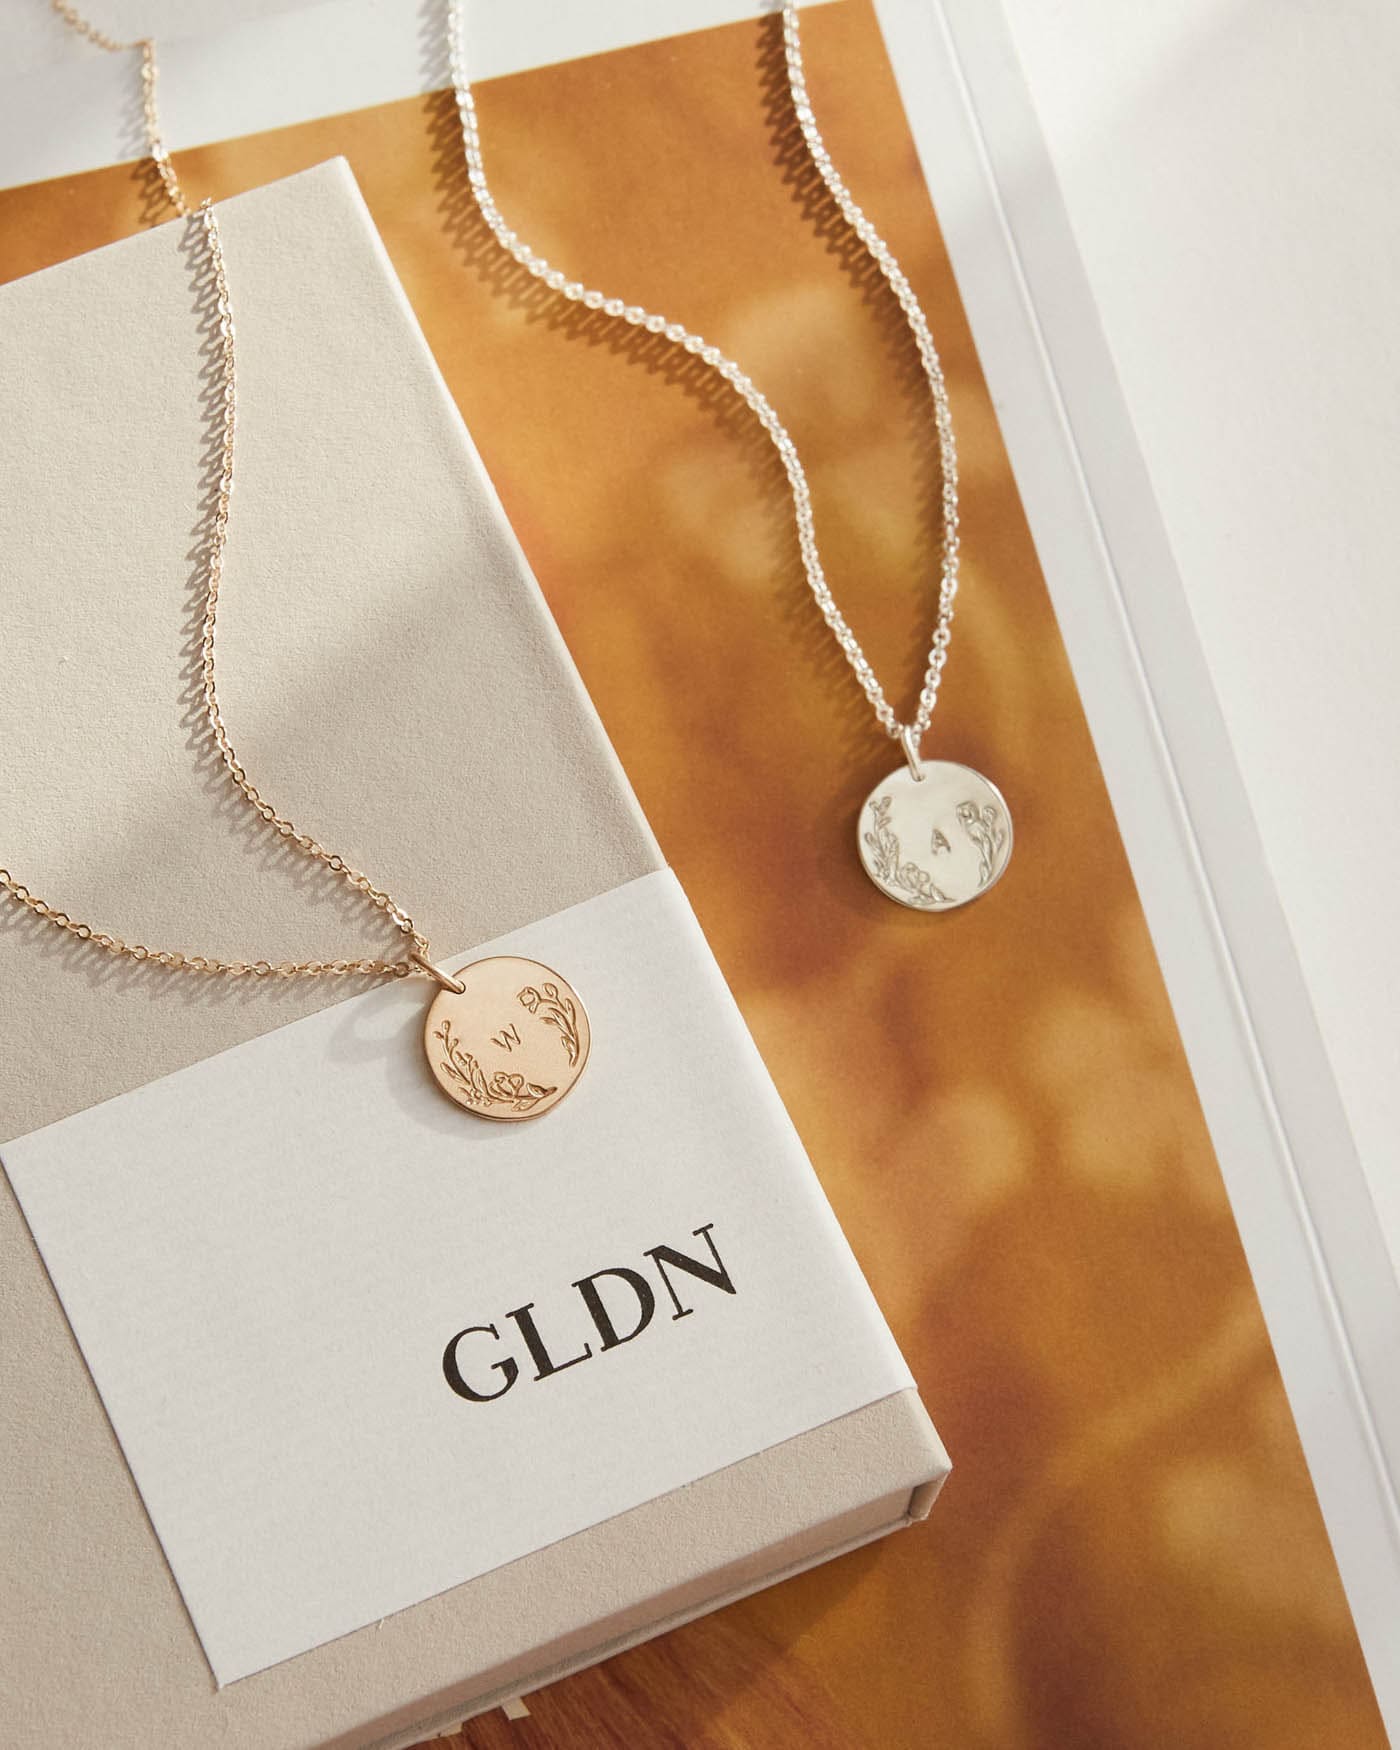 GLDN Small Flower Personalized Necklace 14K Gold Fill / Daffodil